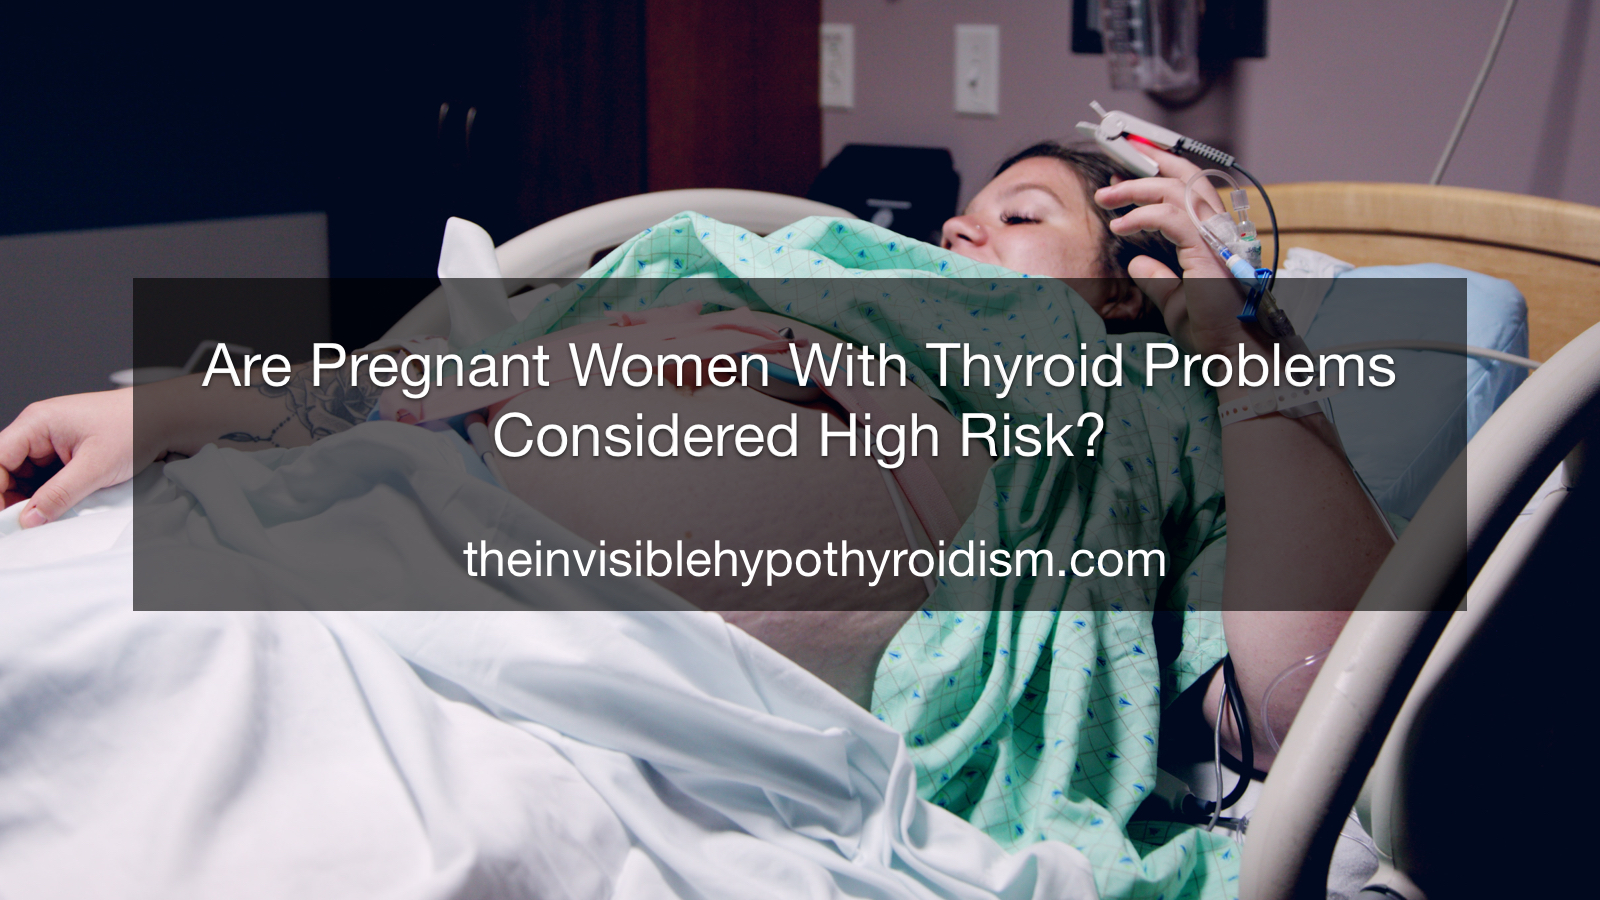 Are Pregnant Women With Thyroid Problems Considered High Risk?